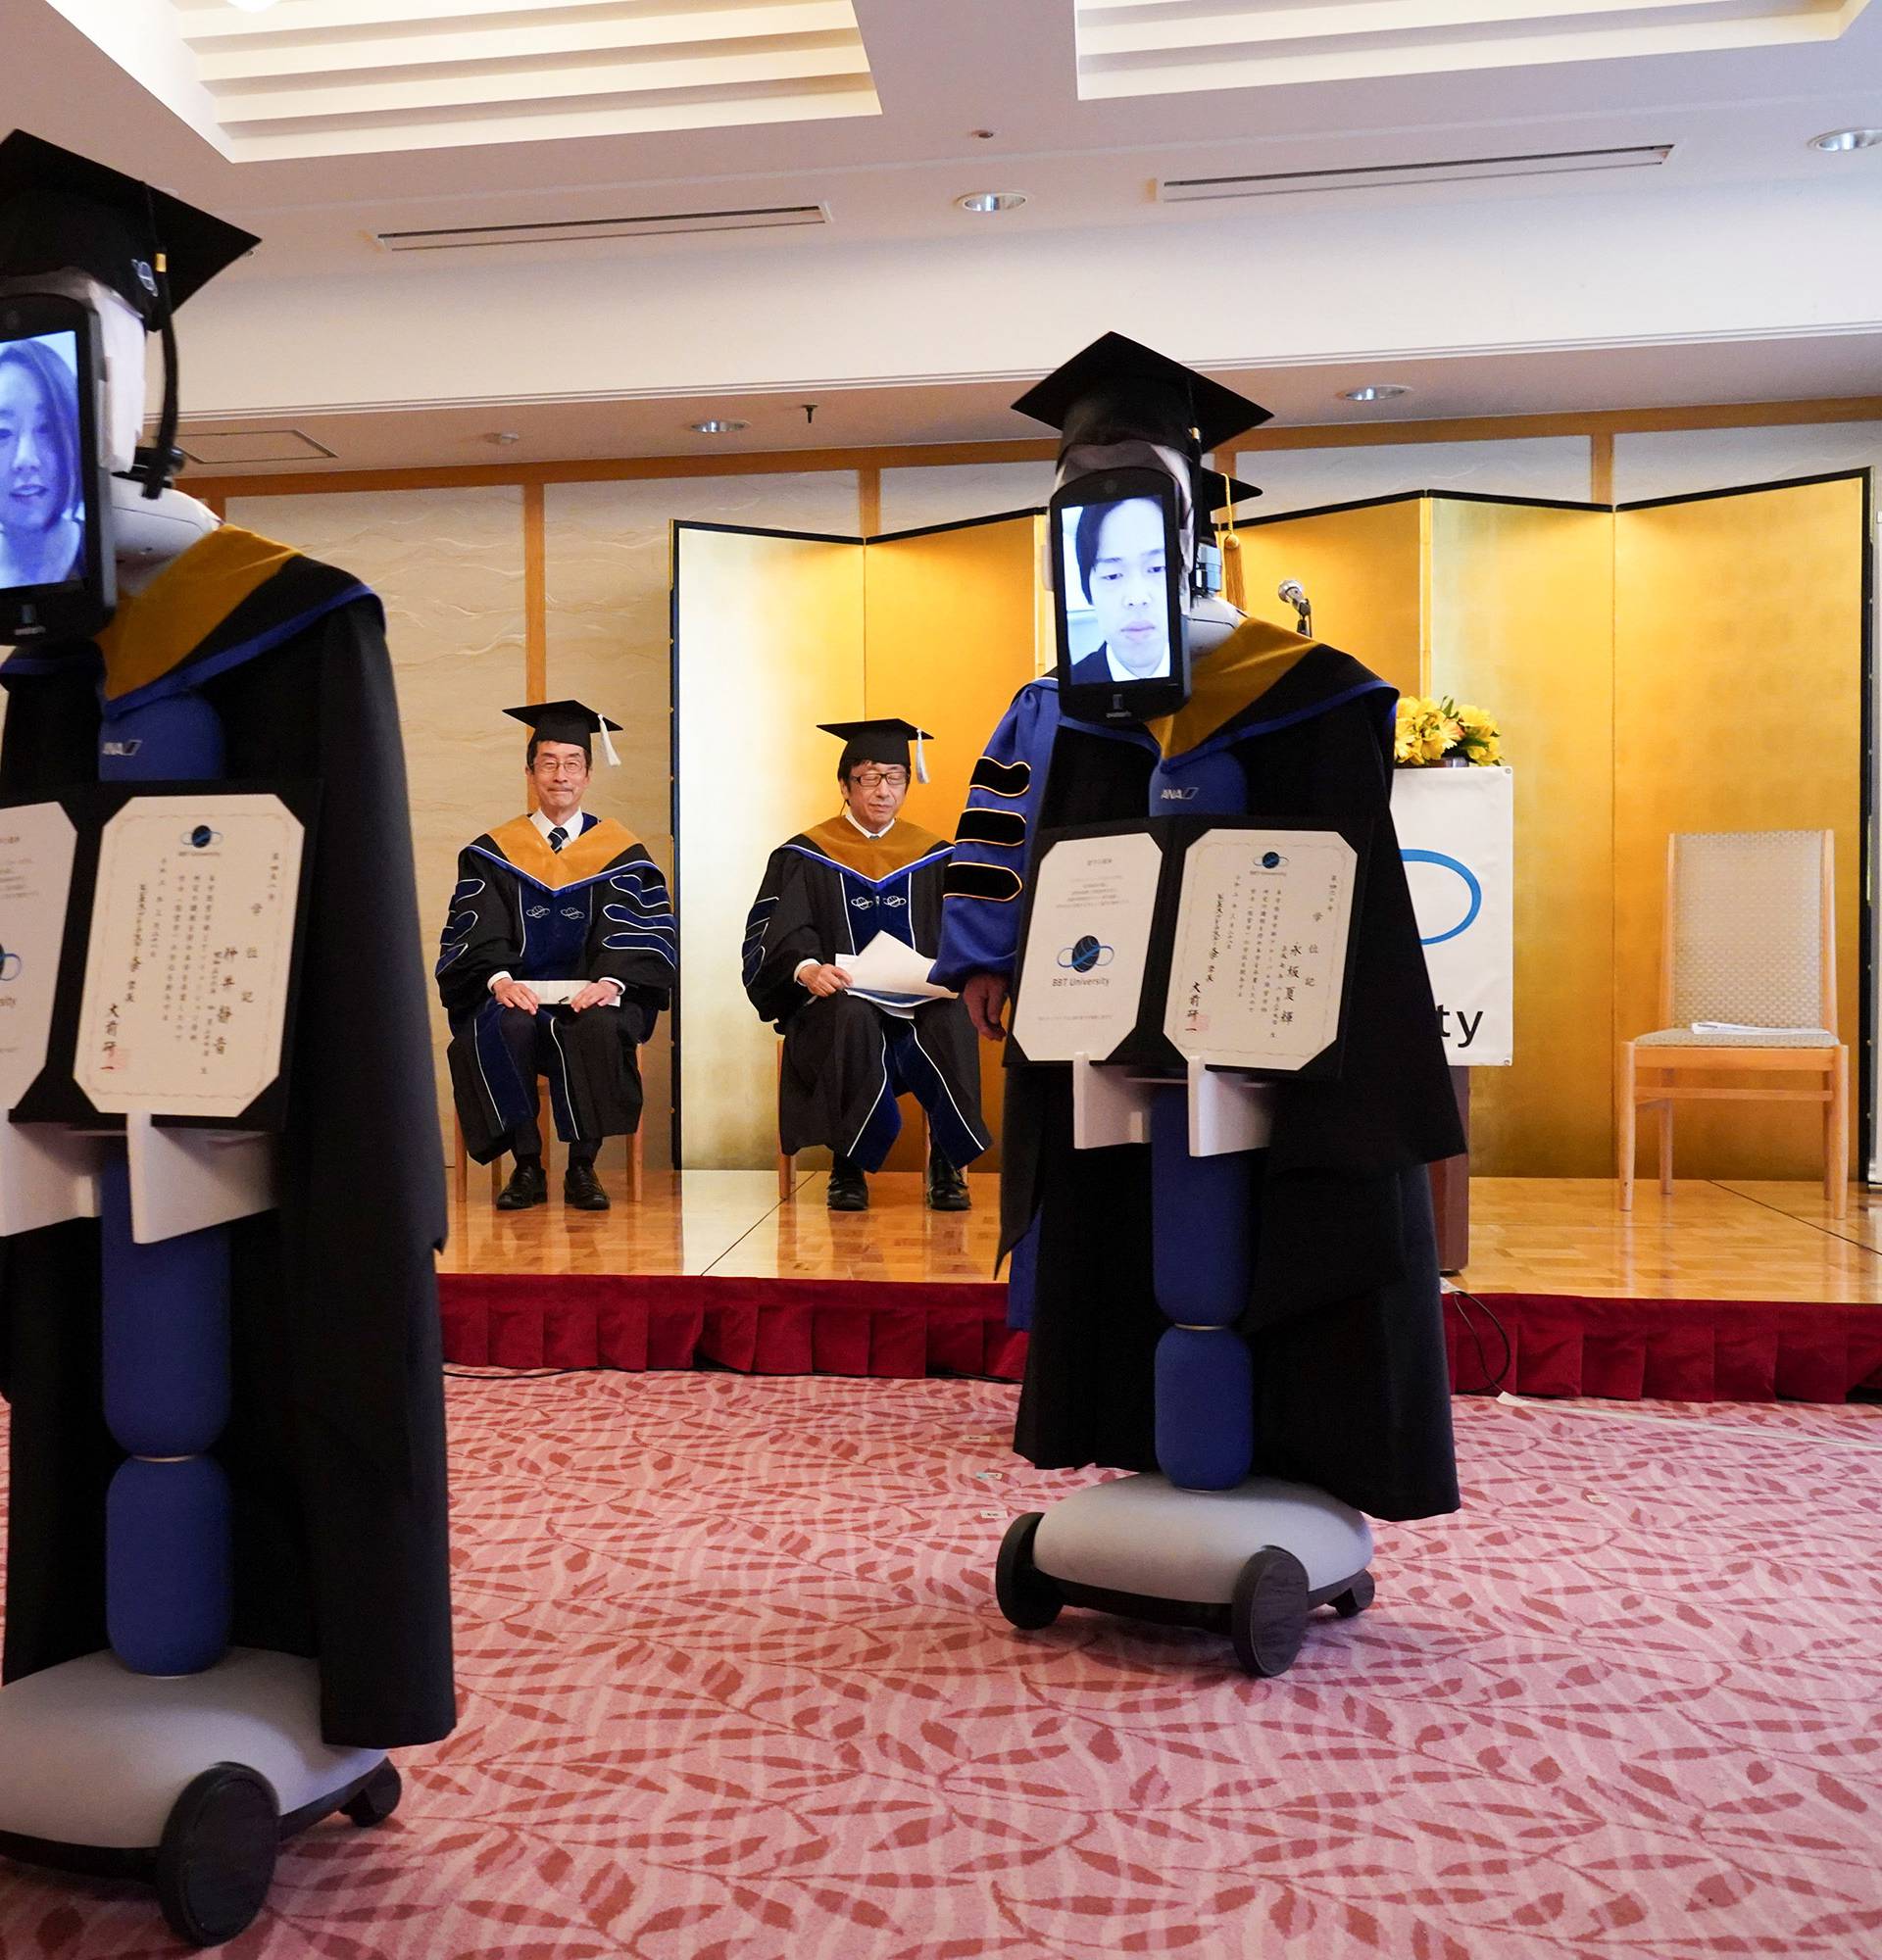 Ipads attached to 'newme' robots replacing graduating students' presence at a ceremony, wear graduation gowns and hats in Tokyo